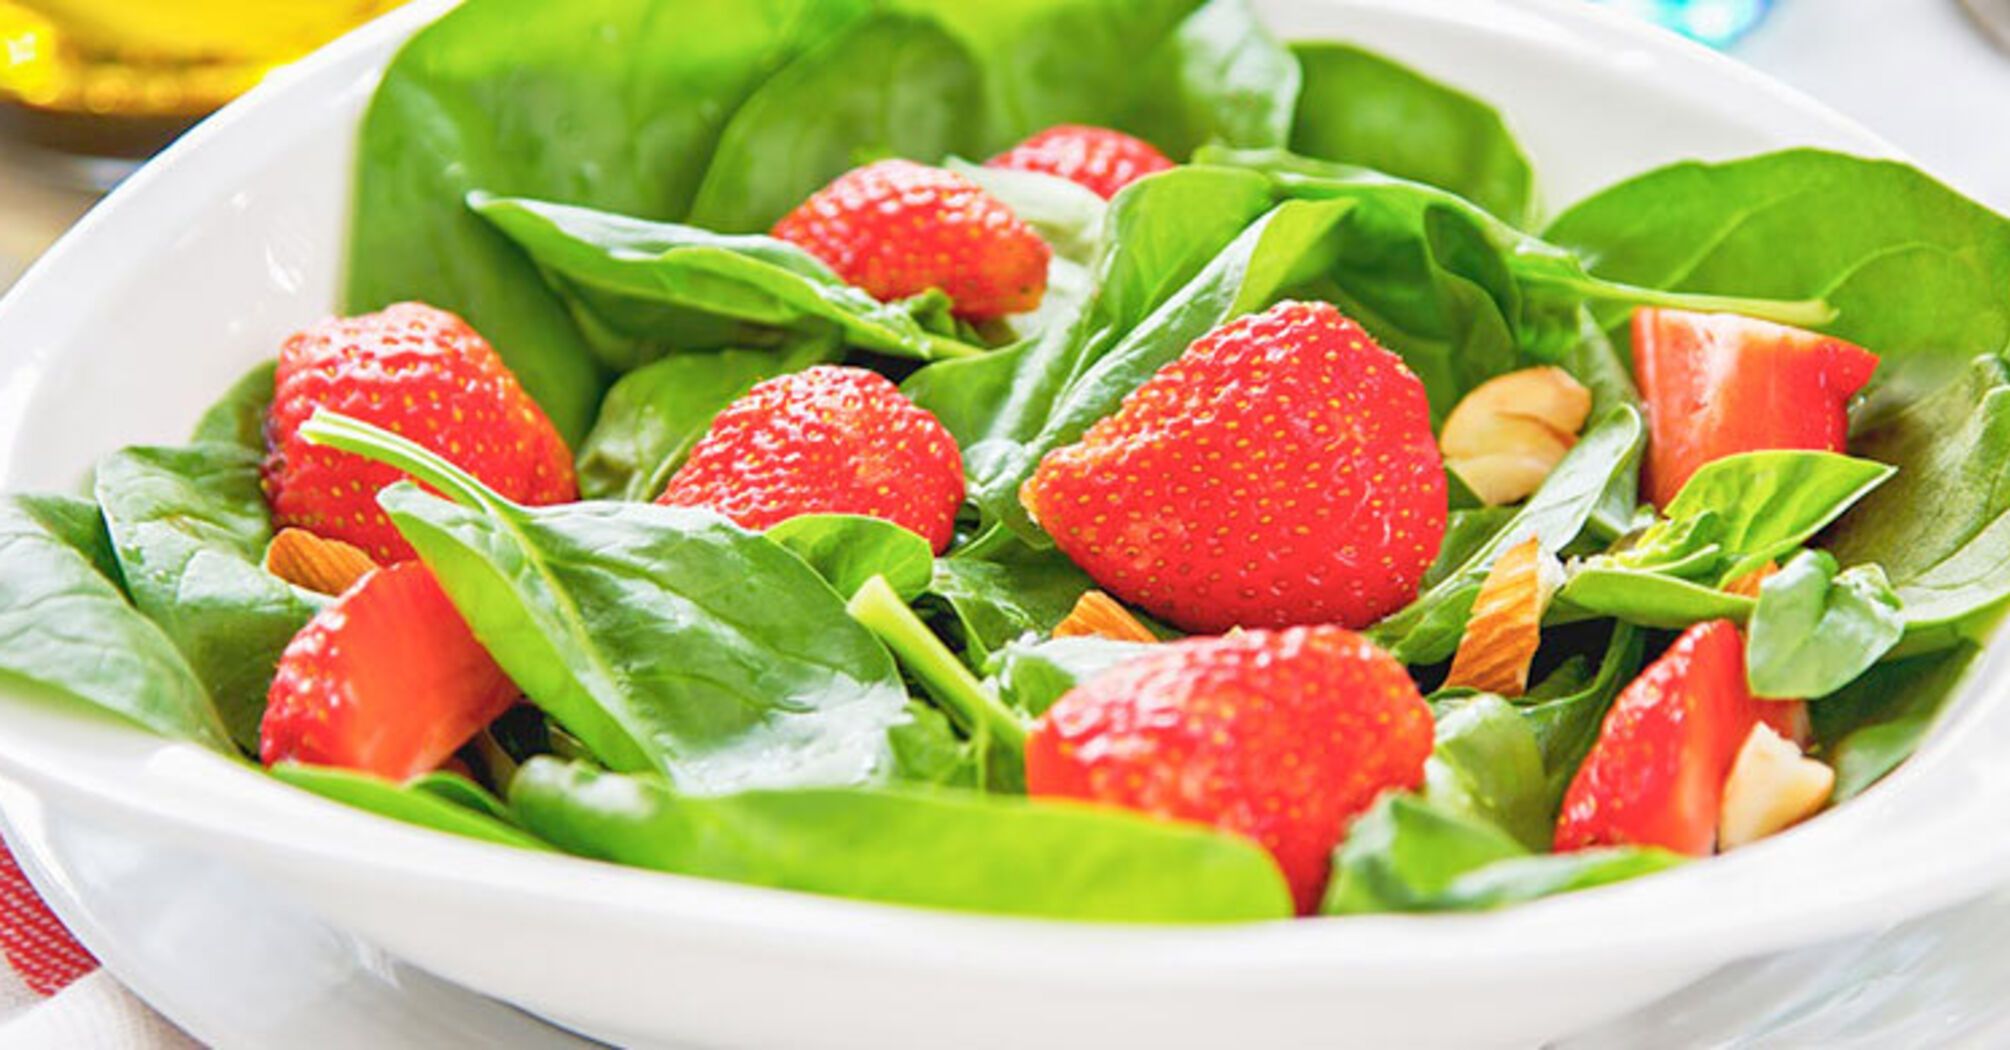 Quick salad with strawberries, spinach and nuts: the recipe